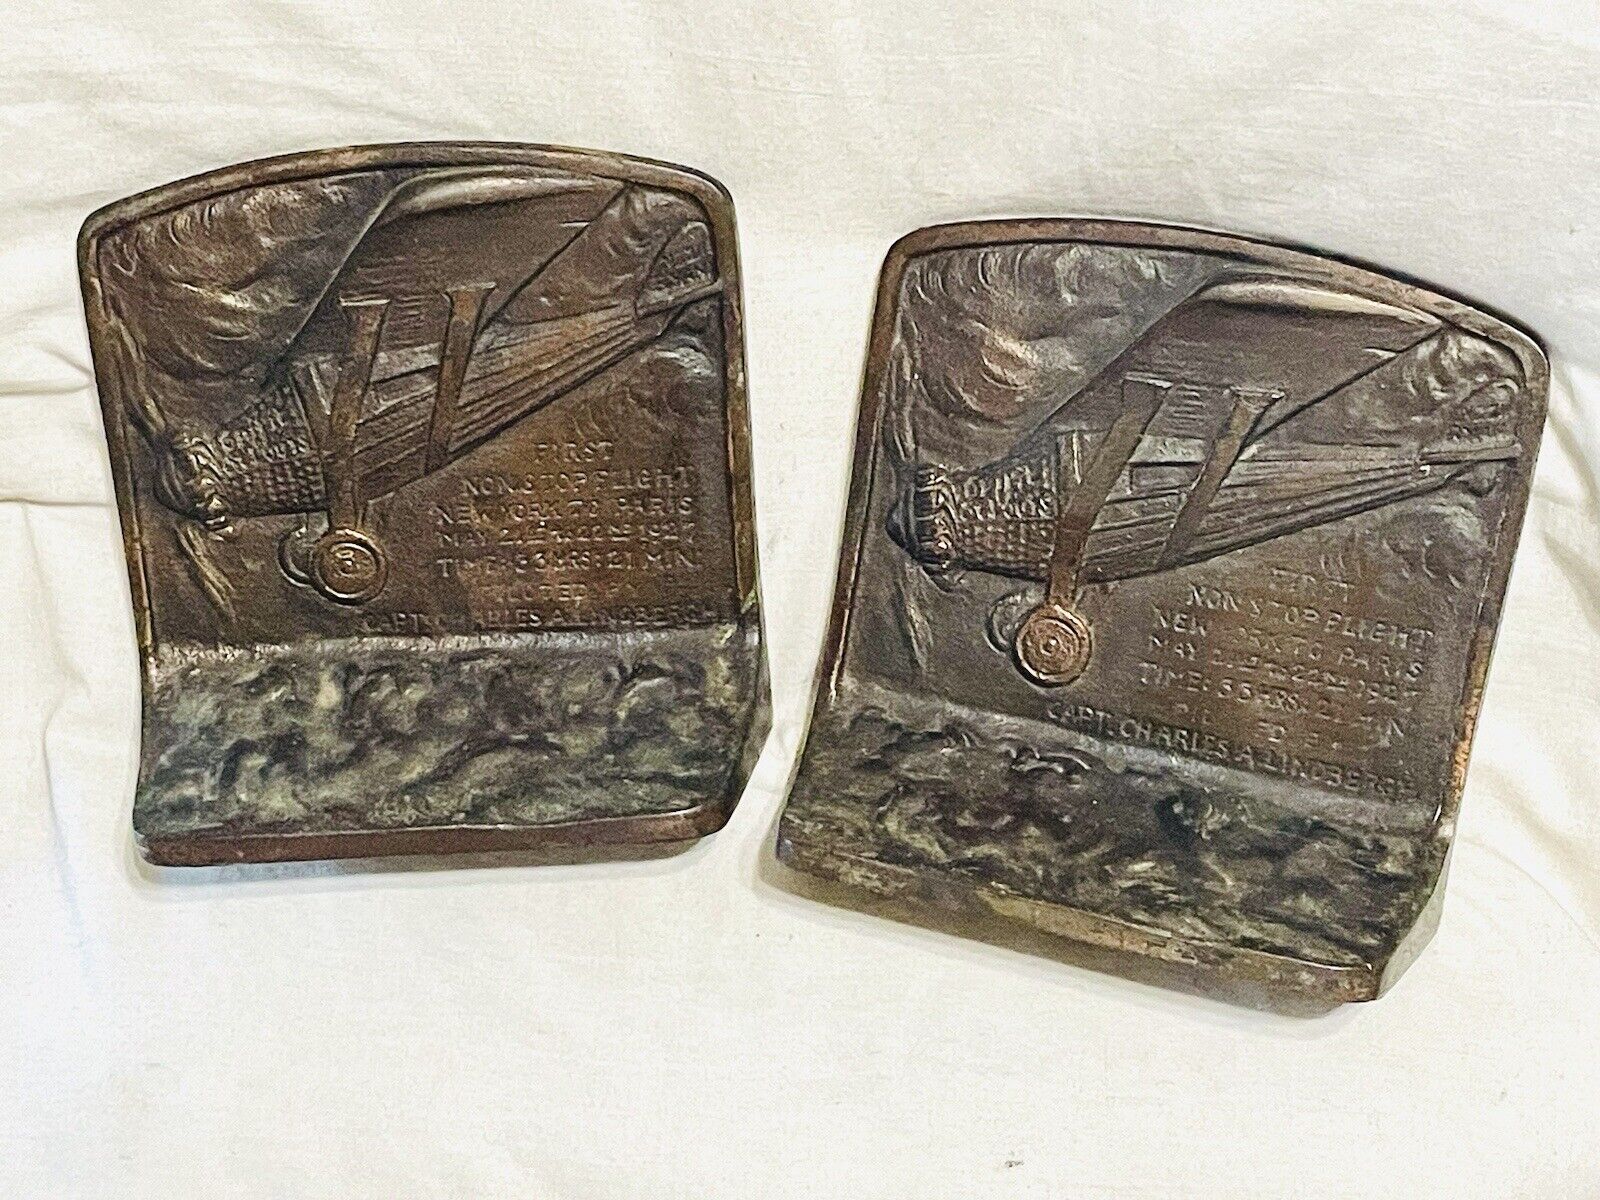 *RARE FIND* Antique🔥Charles LINDBERGH BRONZED Cast🔥Iron 1st FLIGHT🔥BOOKENDS